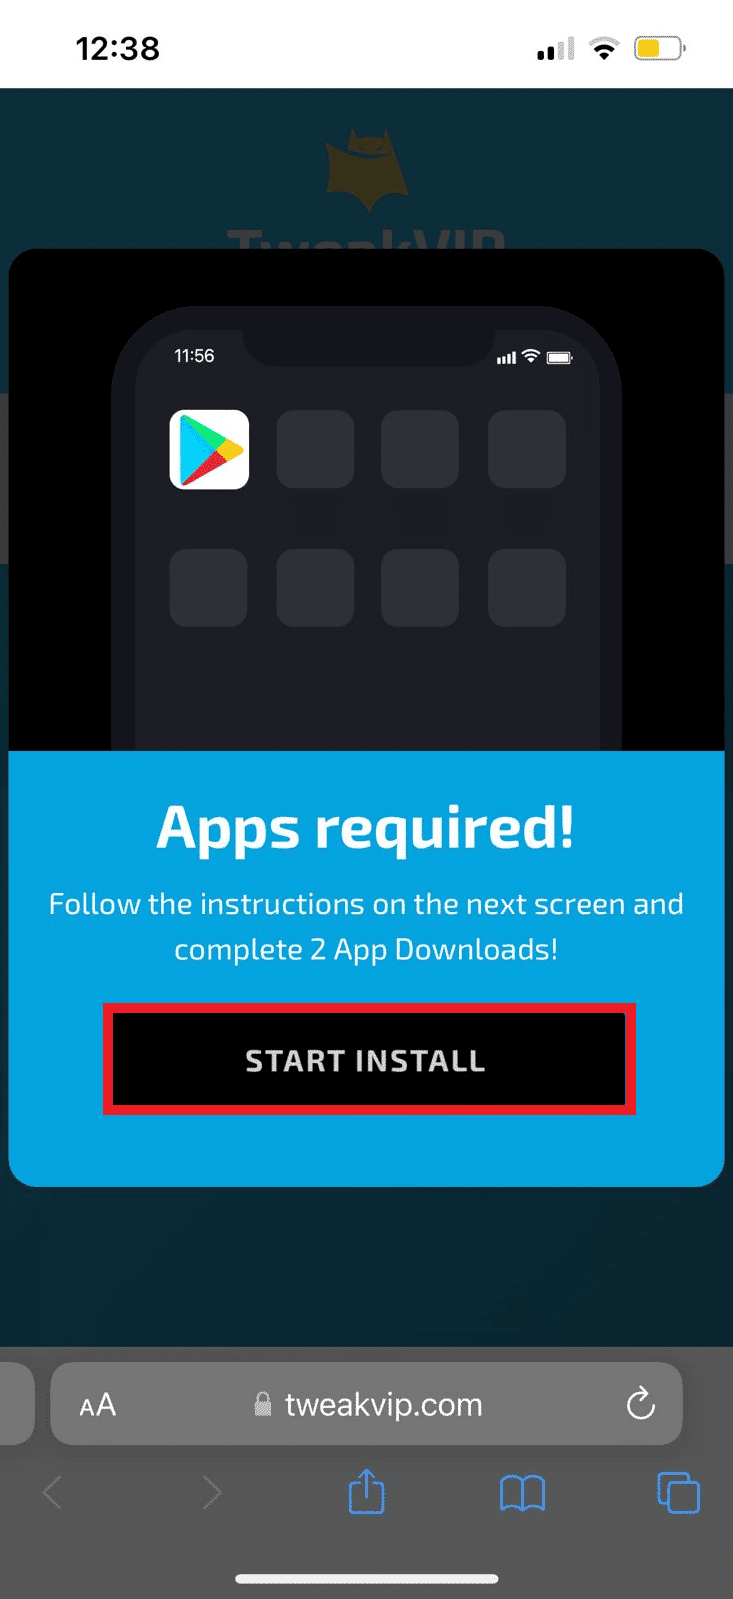 Tap on the START INSTALL link | Google Play games on iPhone